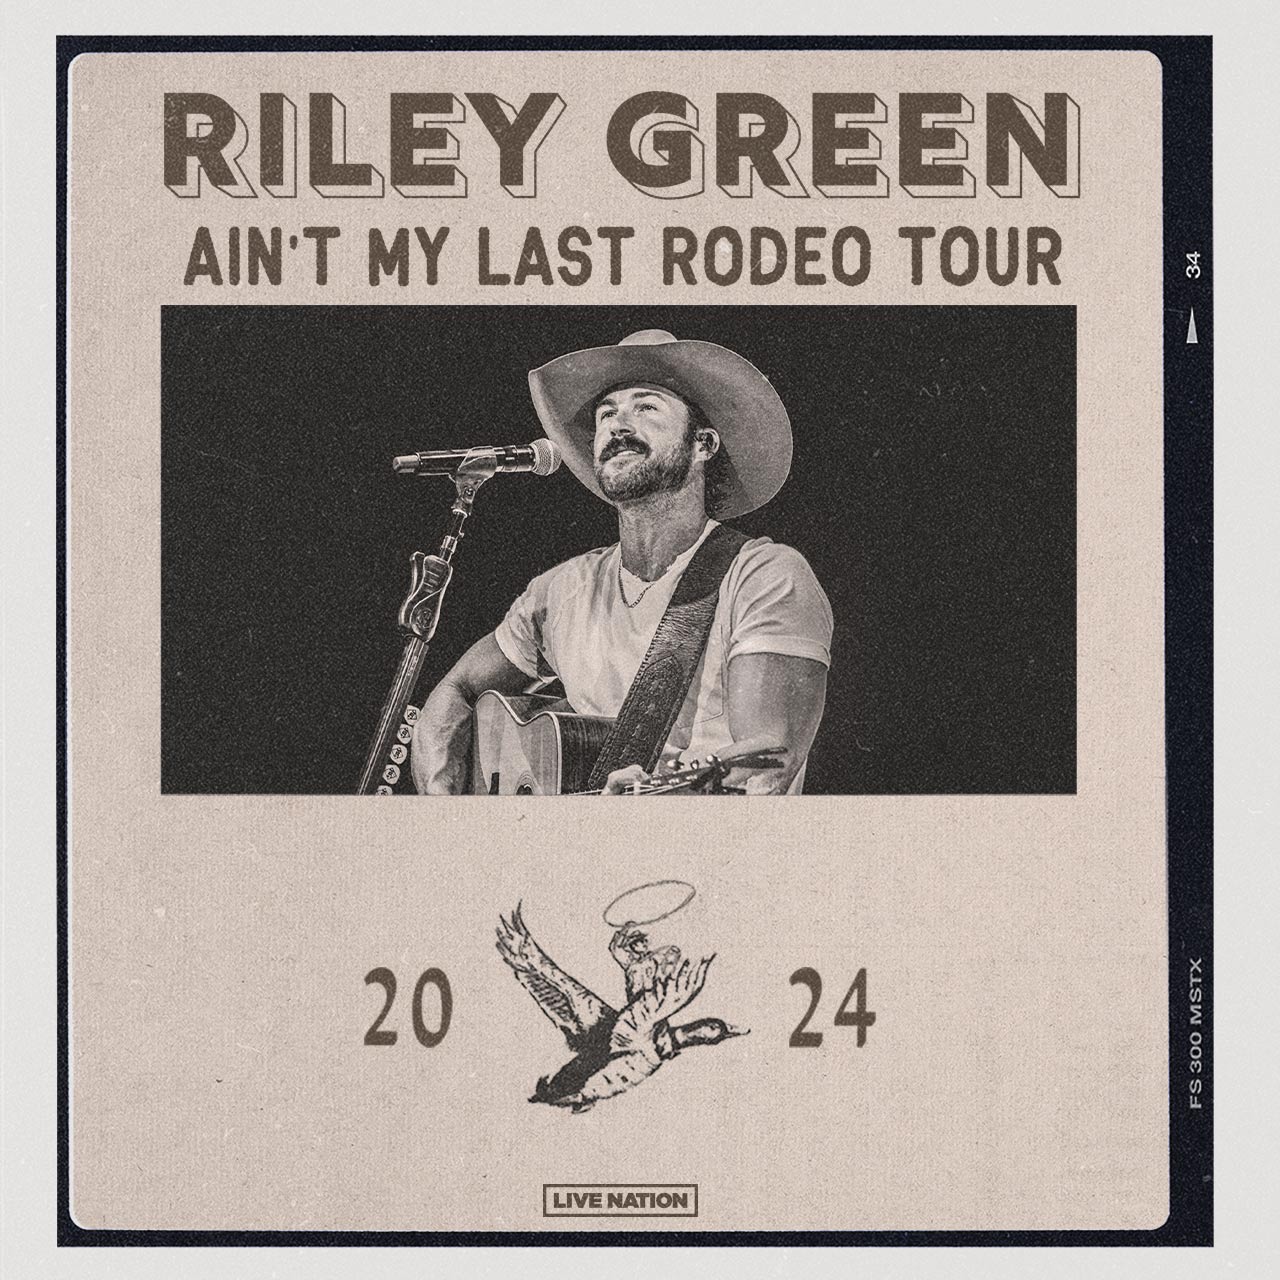 Ain't My Last Rodeo Tour